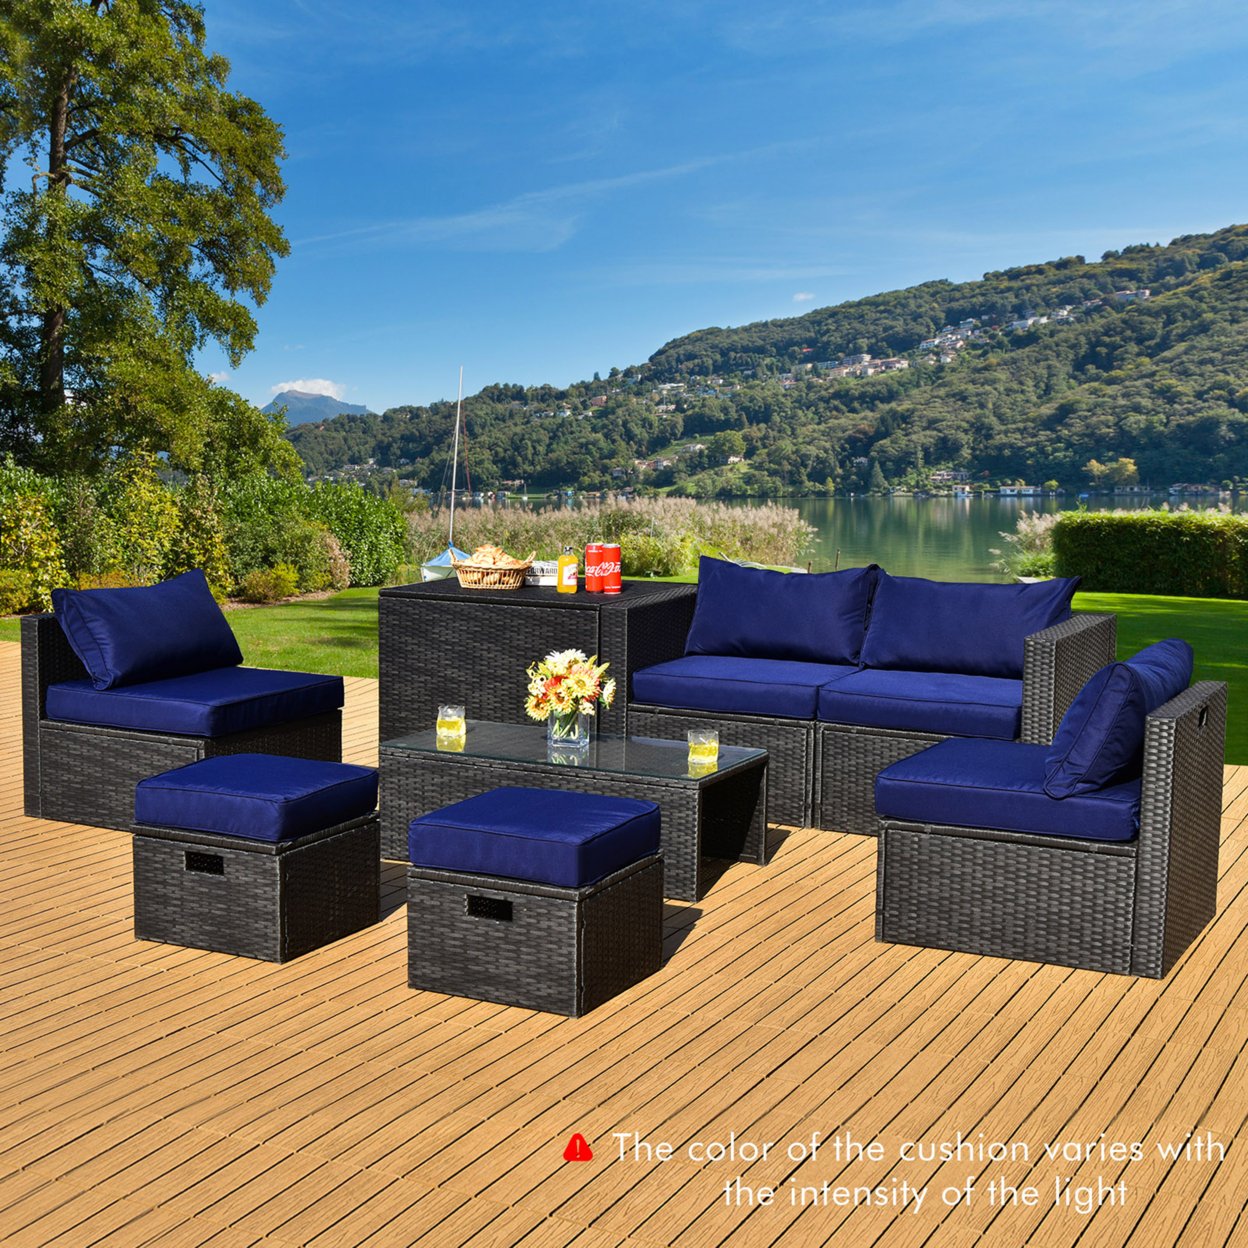 8PCS Rattan Patio Sectional Furniture Set W/ Waterproof Cover & Navy Cushions